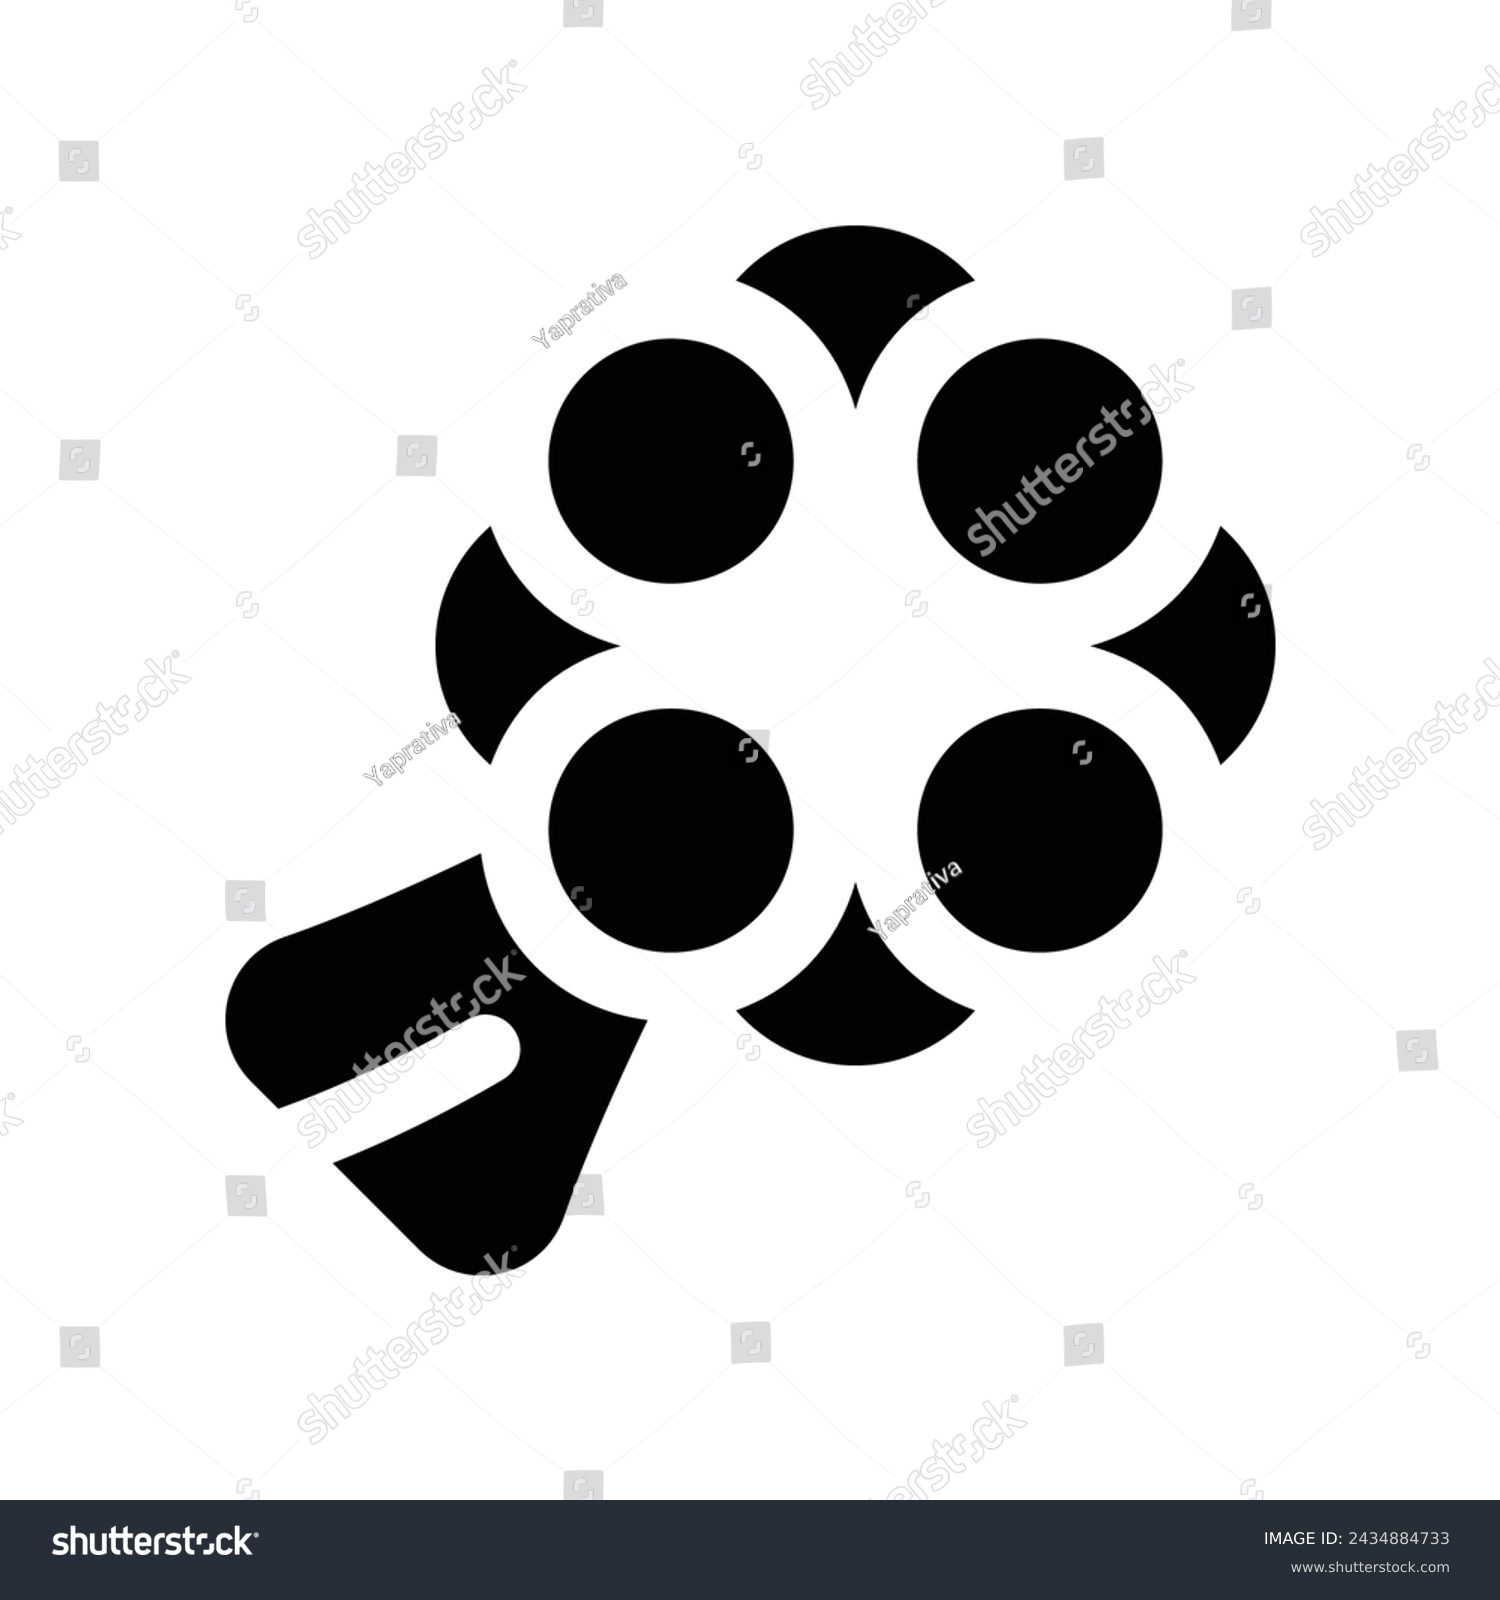 SVG of tasbih icon. vector glyph icon for your website, mobile, presentation, and logo design. svg